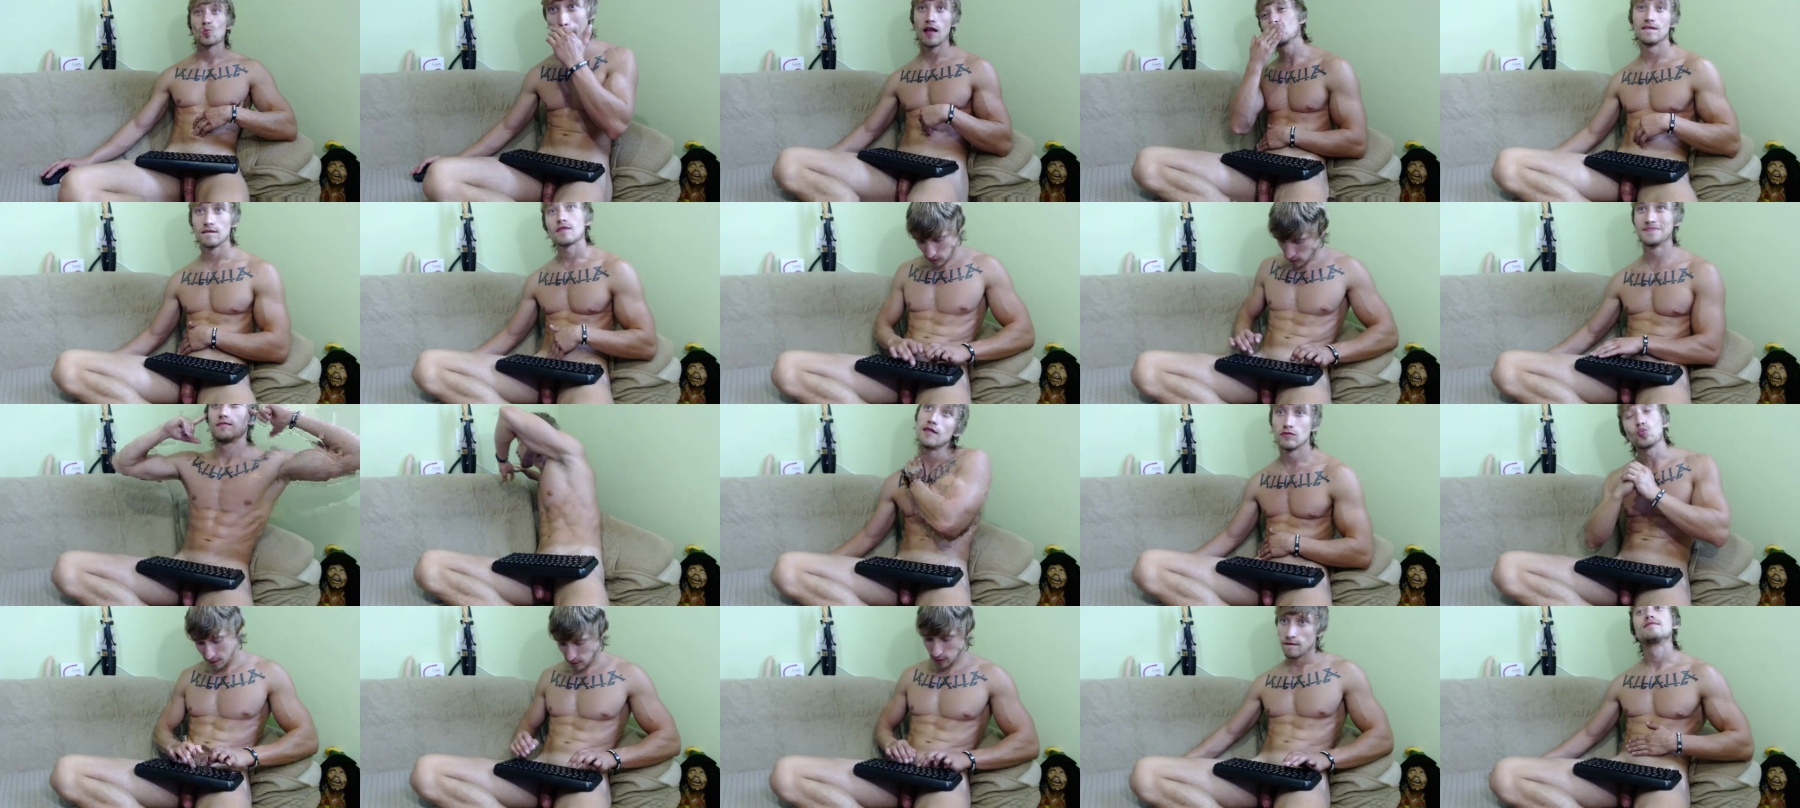 Piter_Penis Topless CAM SHOW @ Chaturbate 28-07-2021